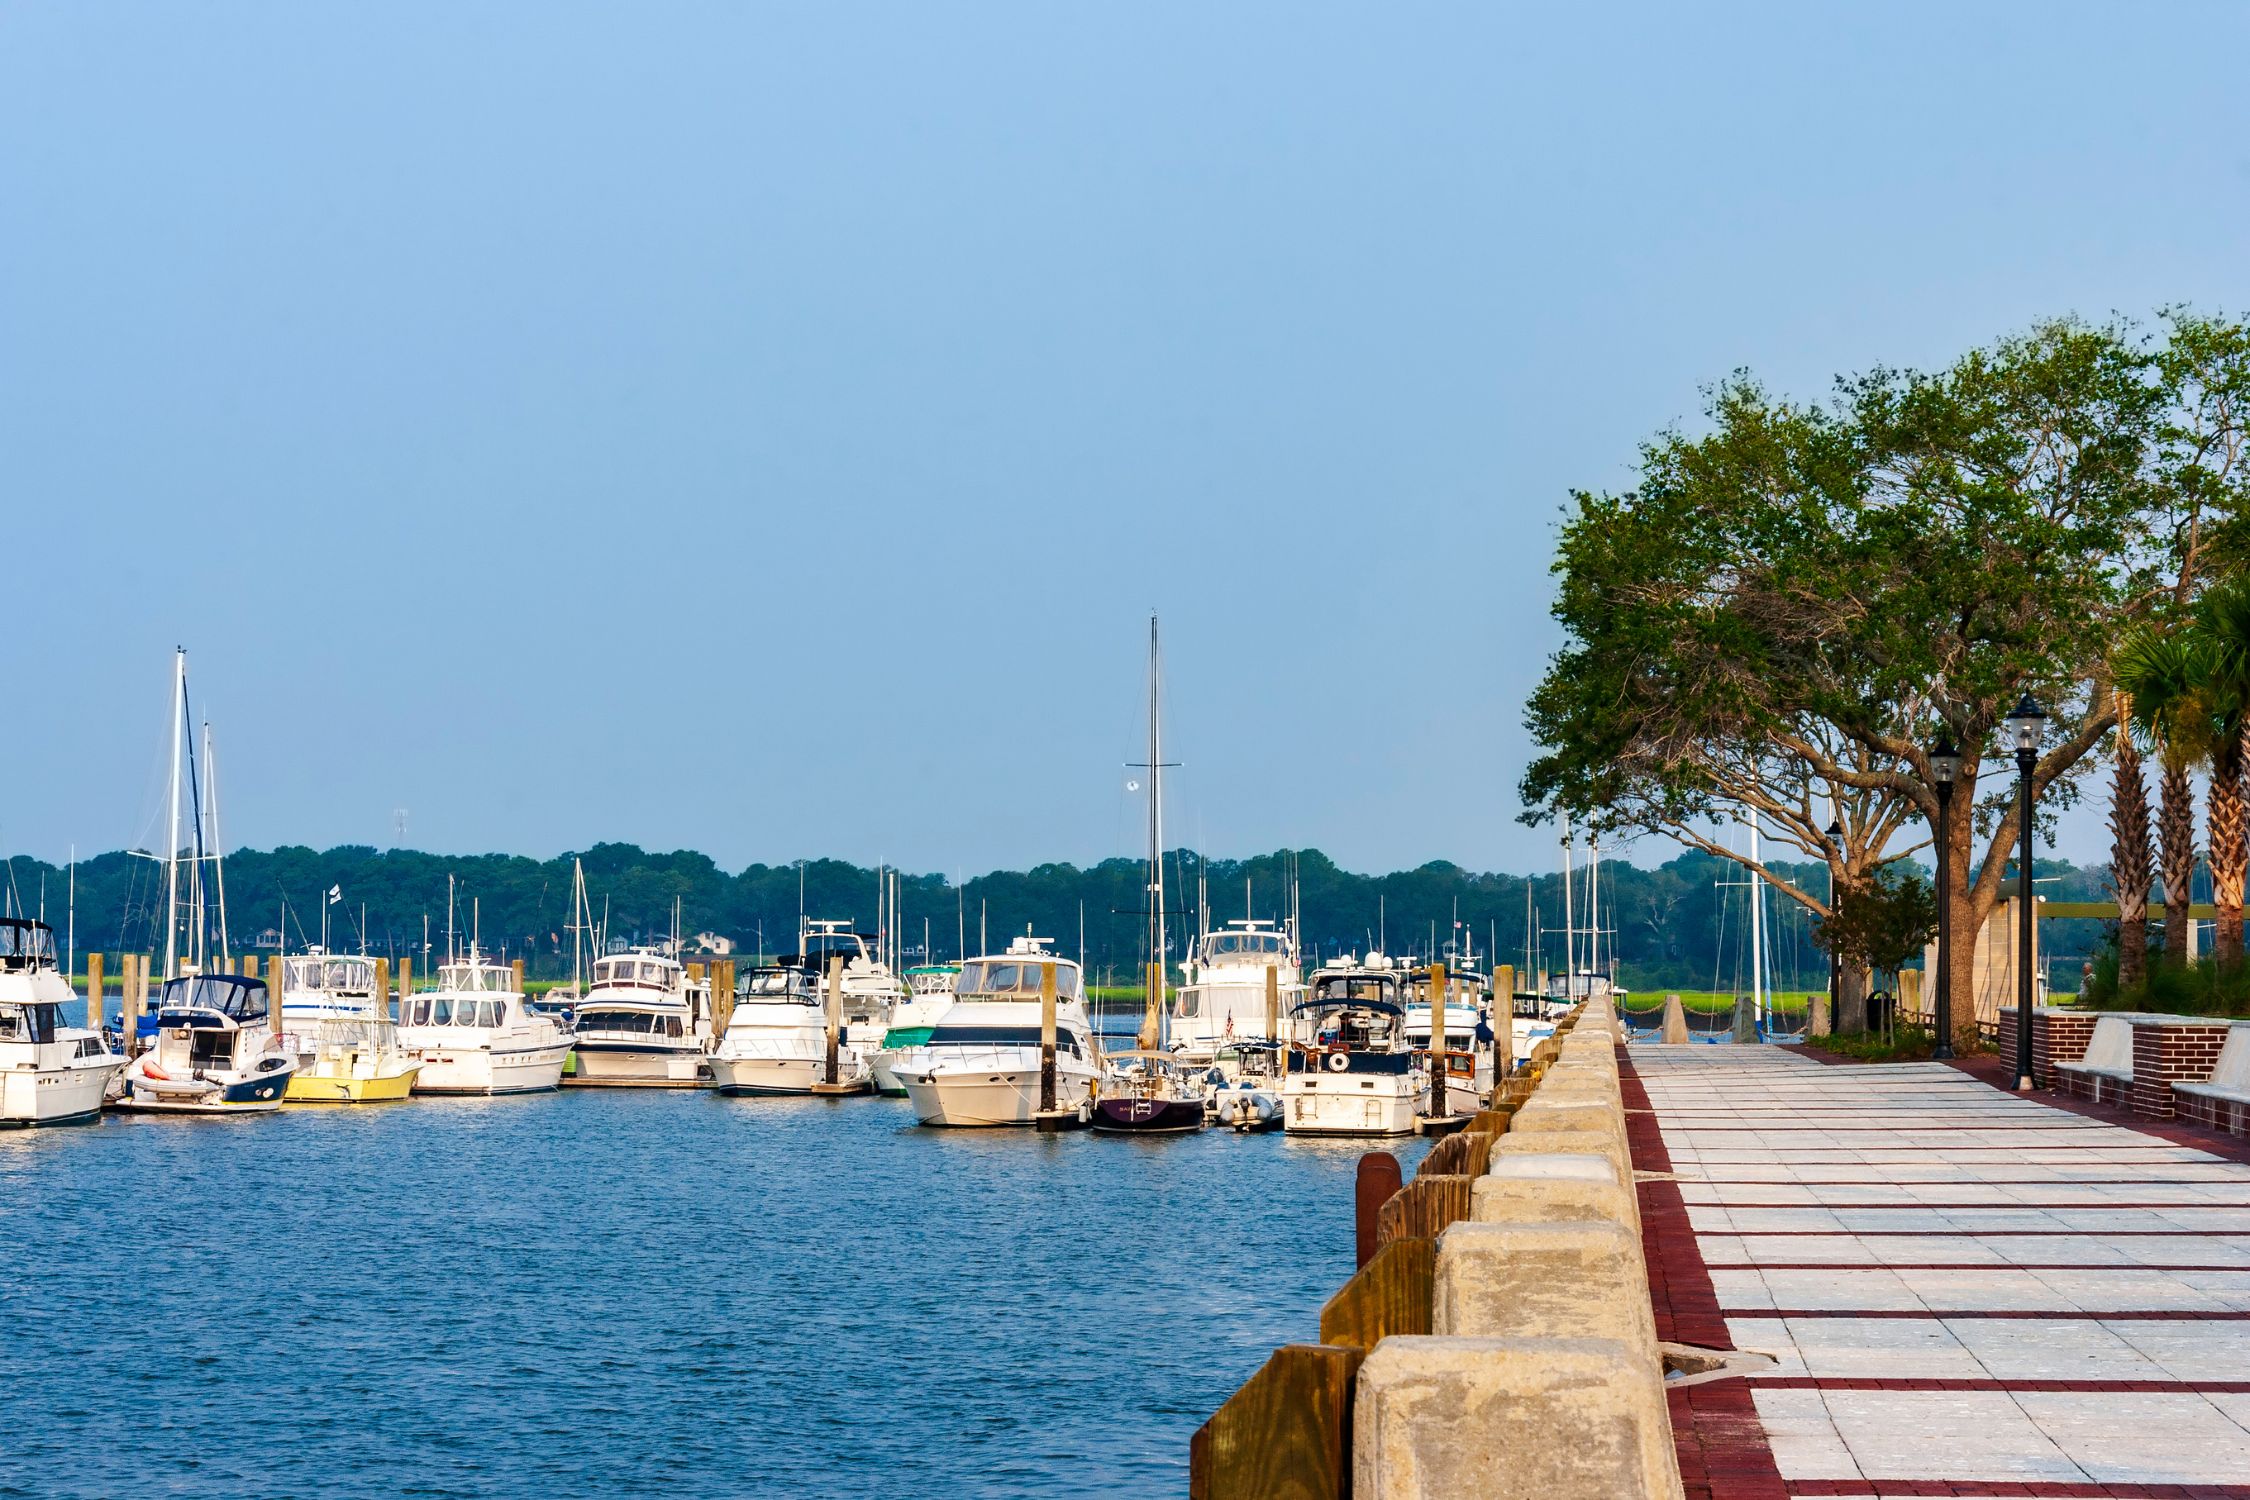 The Best Hotels to Stay in Beaufort, SC